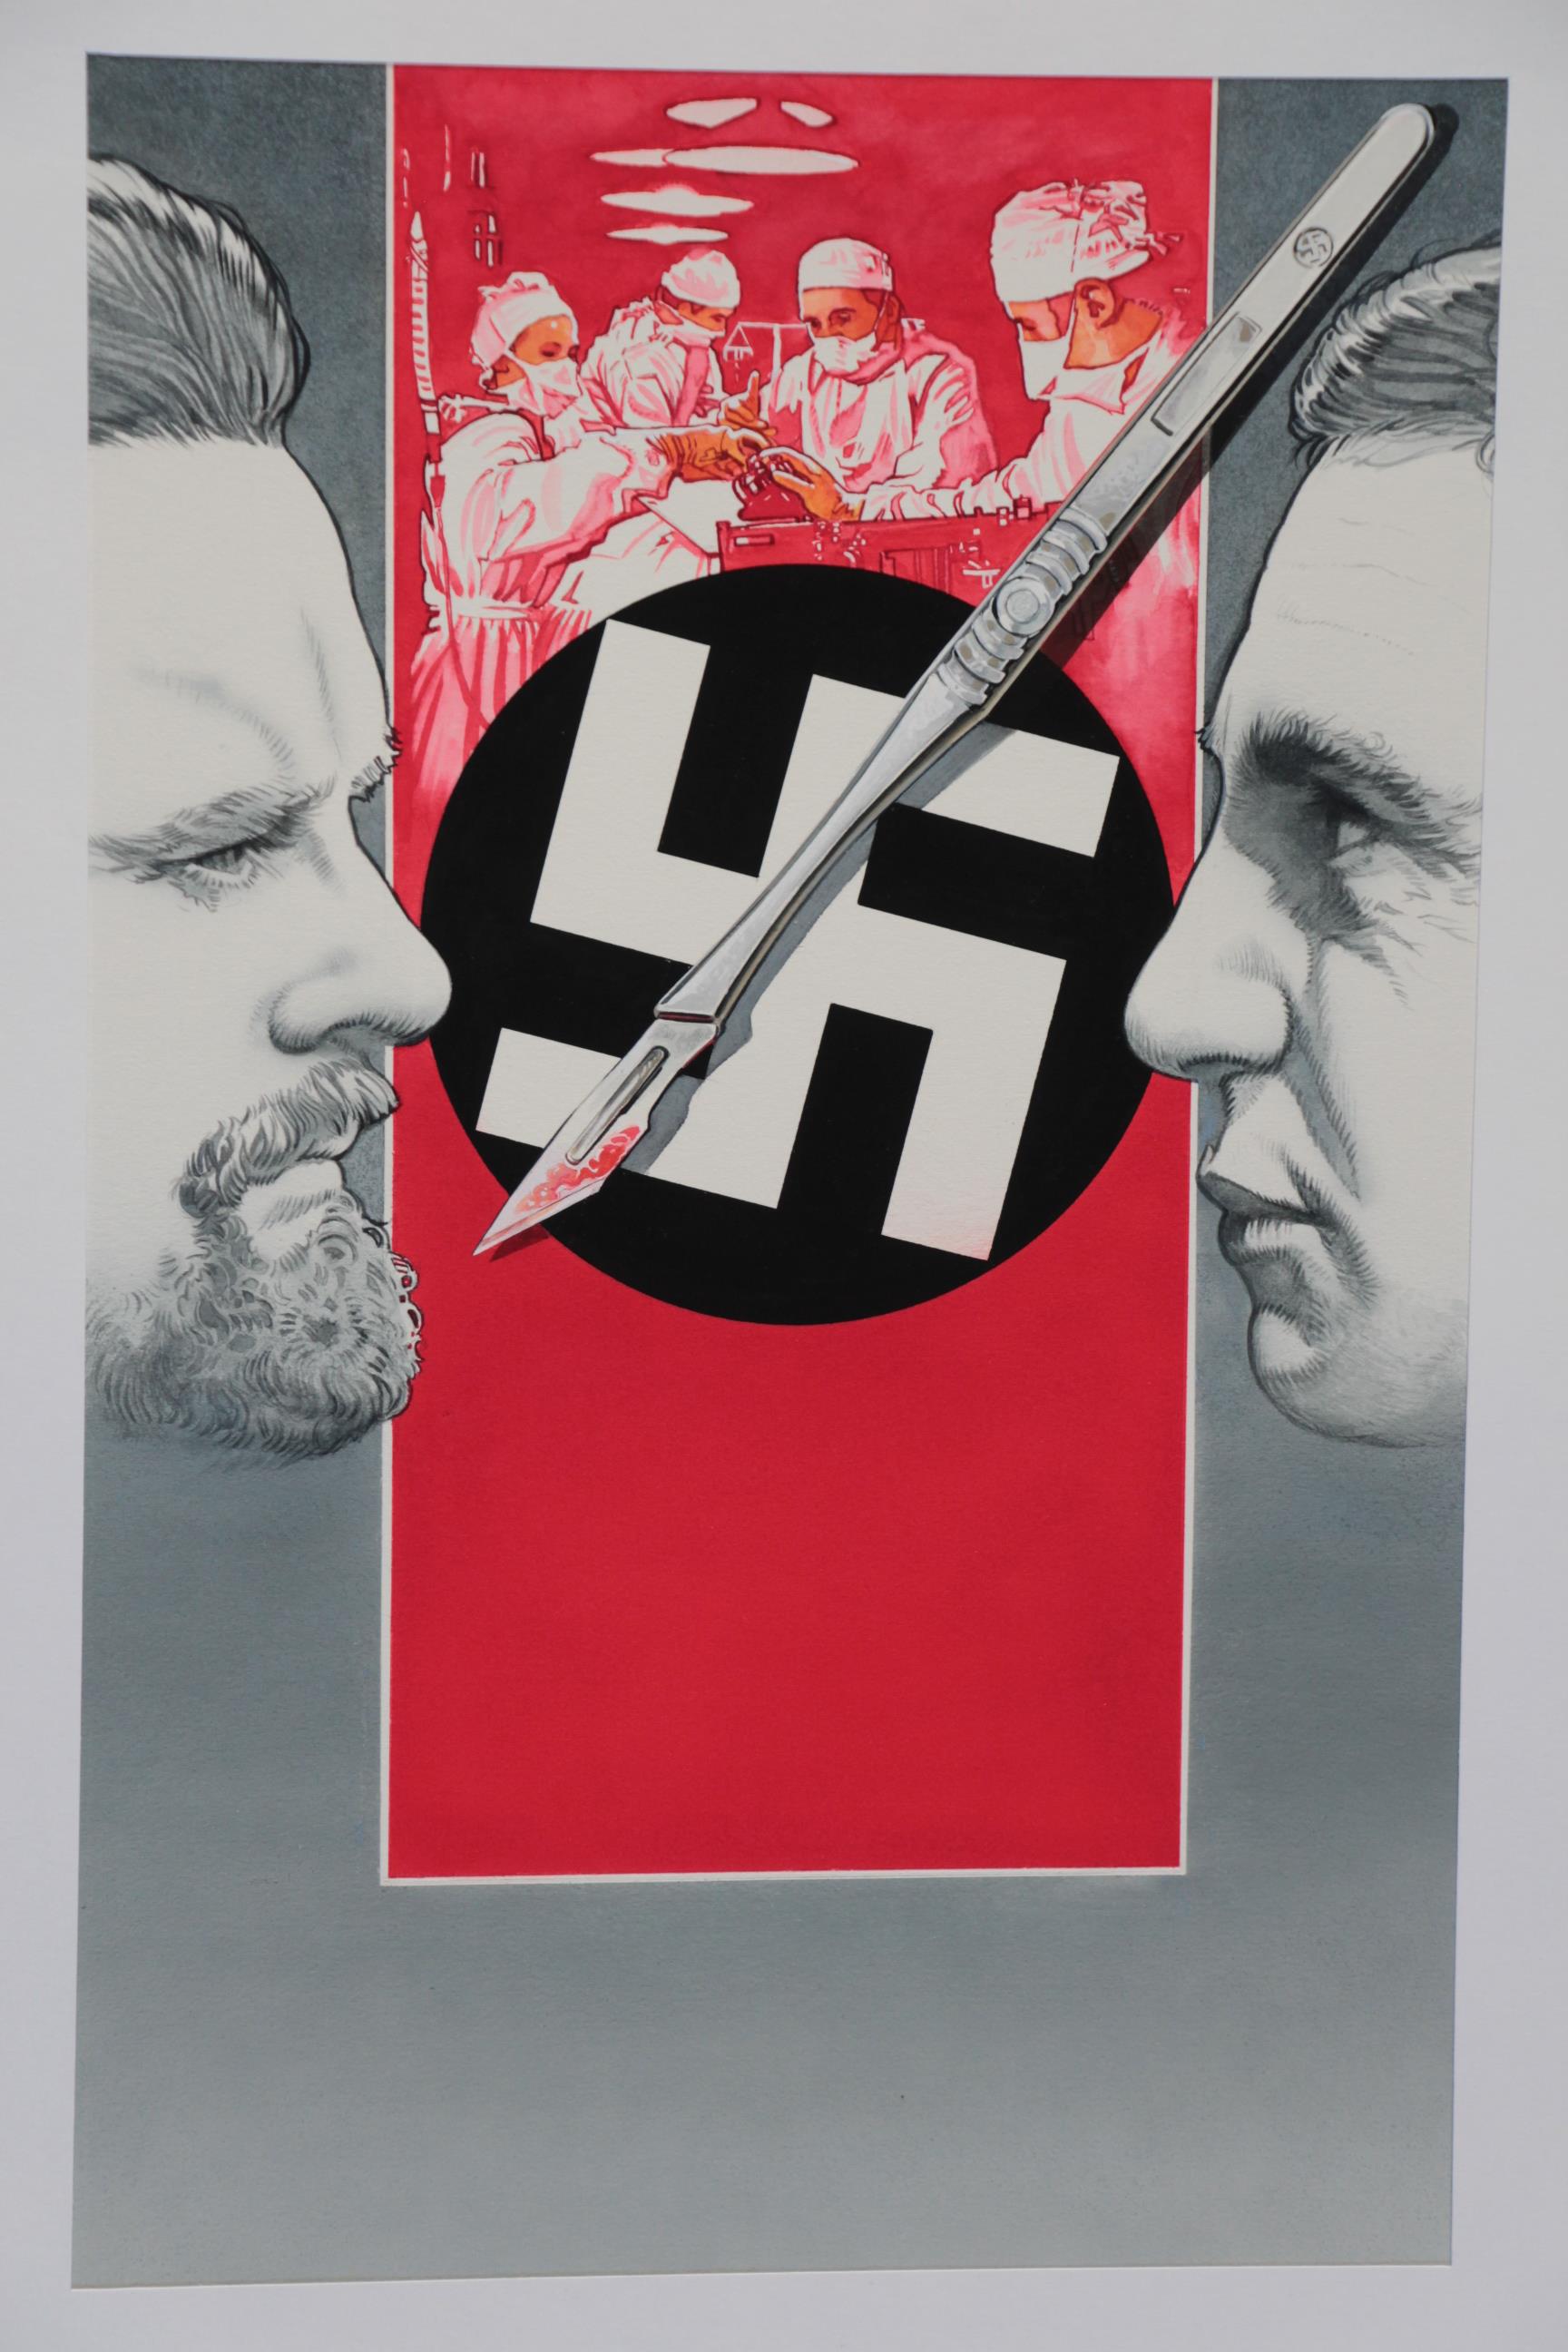 Vic Fair Original art for the Nazi film picturing the swastika, a hospital scene and a scalpel